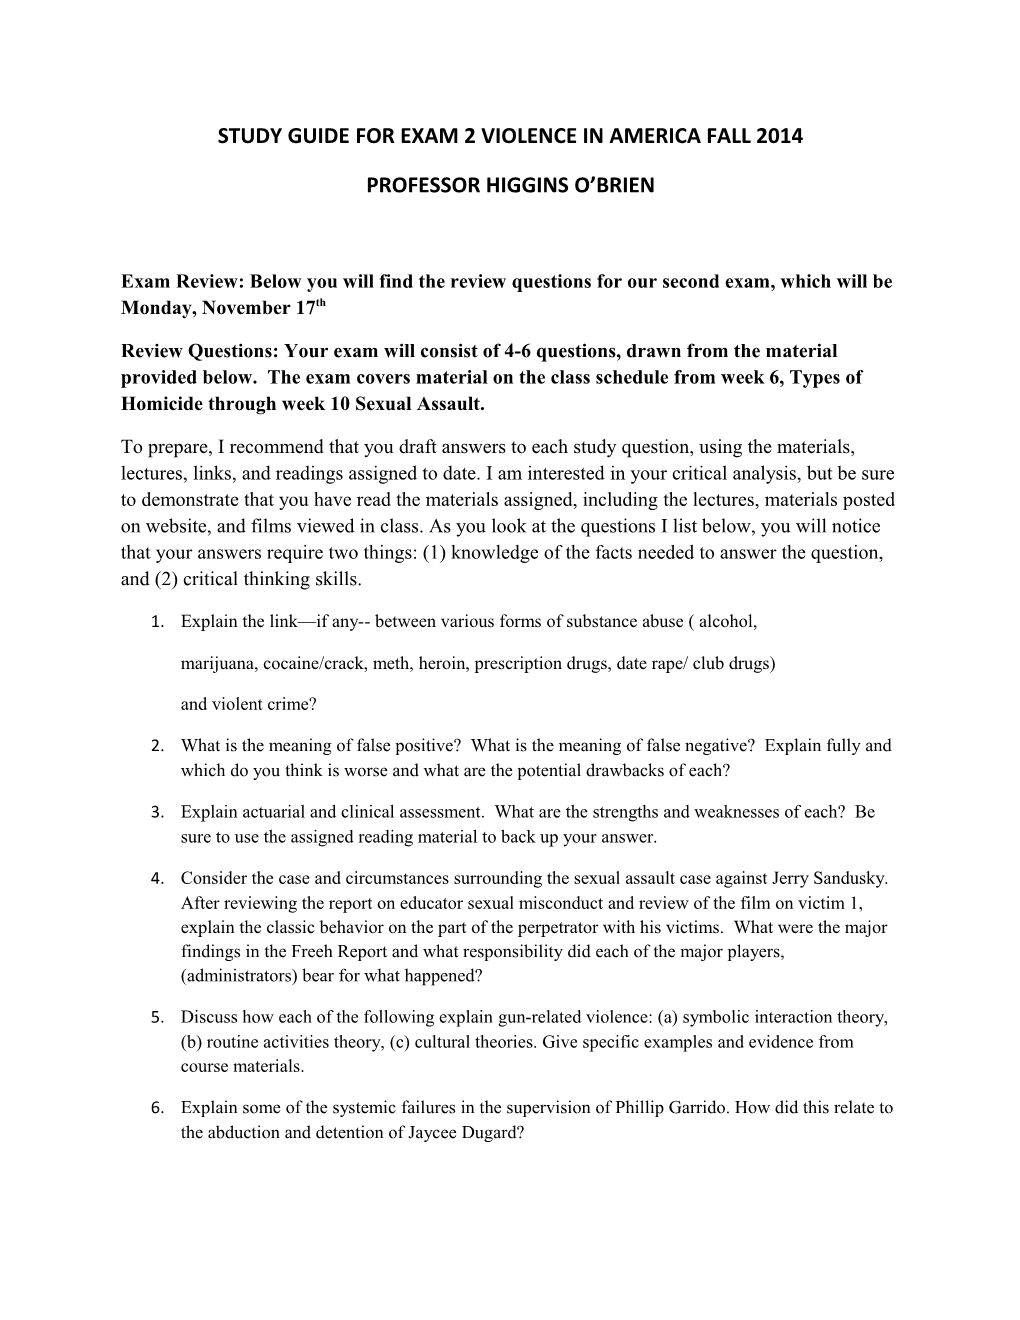 Study Guide for Exam 2 Violence in America Fall 2014